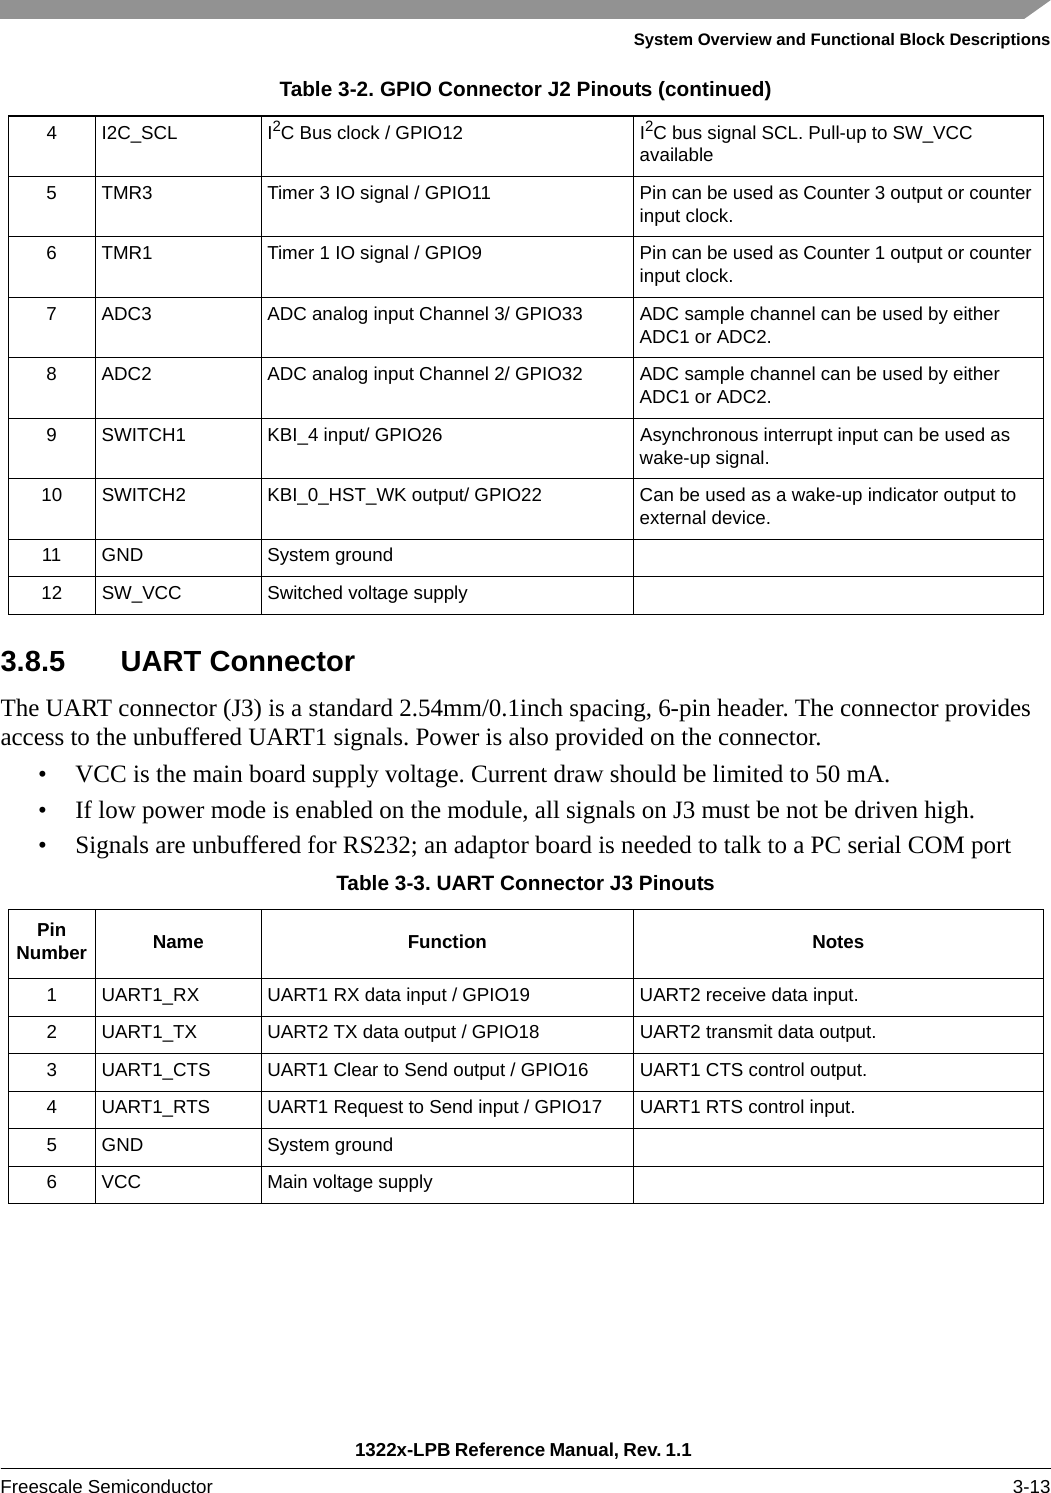 System Overview and Functional Block Descriptions1322x-LPB Reference Manual, Rev. 1.1 Freescale Semiconductor 3-133.8.5 UART ConnectorThe UART connector (J3) is a standard 2.54mm/0.1inch spacing, 6-pin header. The connector provides access to the unbuffered UART1 signals. Power is also provided on the connector.• VCC is the main board supply voltage. Current draw should be limited to 50 mA.• If low power mode is enabled on the module, all signals on J3 must be not be driven high.• Signals are unbuffered for RS232; an adaptor board is needed to talk to a PC serial COM port4I2C_SCL I2C Bus clock / GPIO12 I2C bus signal SCL. Pull-up to SW_VCC available5 TMR3 Timer 3 IO signal / GPIO11 Pin can be used as Counter 3 output or counter input clock.6 TMR1 Timer 1 IO signal / GPIO9 Pin can be used as Counter 1 output or counter input clock.7 ADC3 ADC analog input Channel 3/ GPIO33 ADC sample channel can be used by either ADC1 or ADC2.8 ADC2 ADC analog input Channel 2/ GPIO32 ADC sample channel can be used by either ADC1 or ADC2.9 SWITCH1 KBI_4 input/ GPIO26 Asynchronous interrupt input can be used as wake-up signal.10 SWITCH2 KBI_0_HST_WK output/ GPIO22 Can be used as a wake-up indicator output to external device.11 GND System ground12 SW_VCC Switched voltage supplyTable 3-3. UART Connector J3 PinoutsPinNumber Name Function Notes1 UART1_RX UART1 RX data input / GPIO19 UART2 receive data input.2 UART1_TX UART2 TX data output / GPIO18 UART2 transmit data output.3 UART1_CTS UART1 Clear to Send output / GPIO16 UART1 CTS control output.4 UART1_RTS UART1 Request to Send input / GPIO17 UART1 RTS control input.5 GND System ground6 VCC Main voltage supplyTable 3-2. GPIO Connector J2 Pinouts (continued)